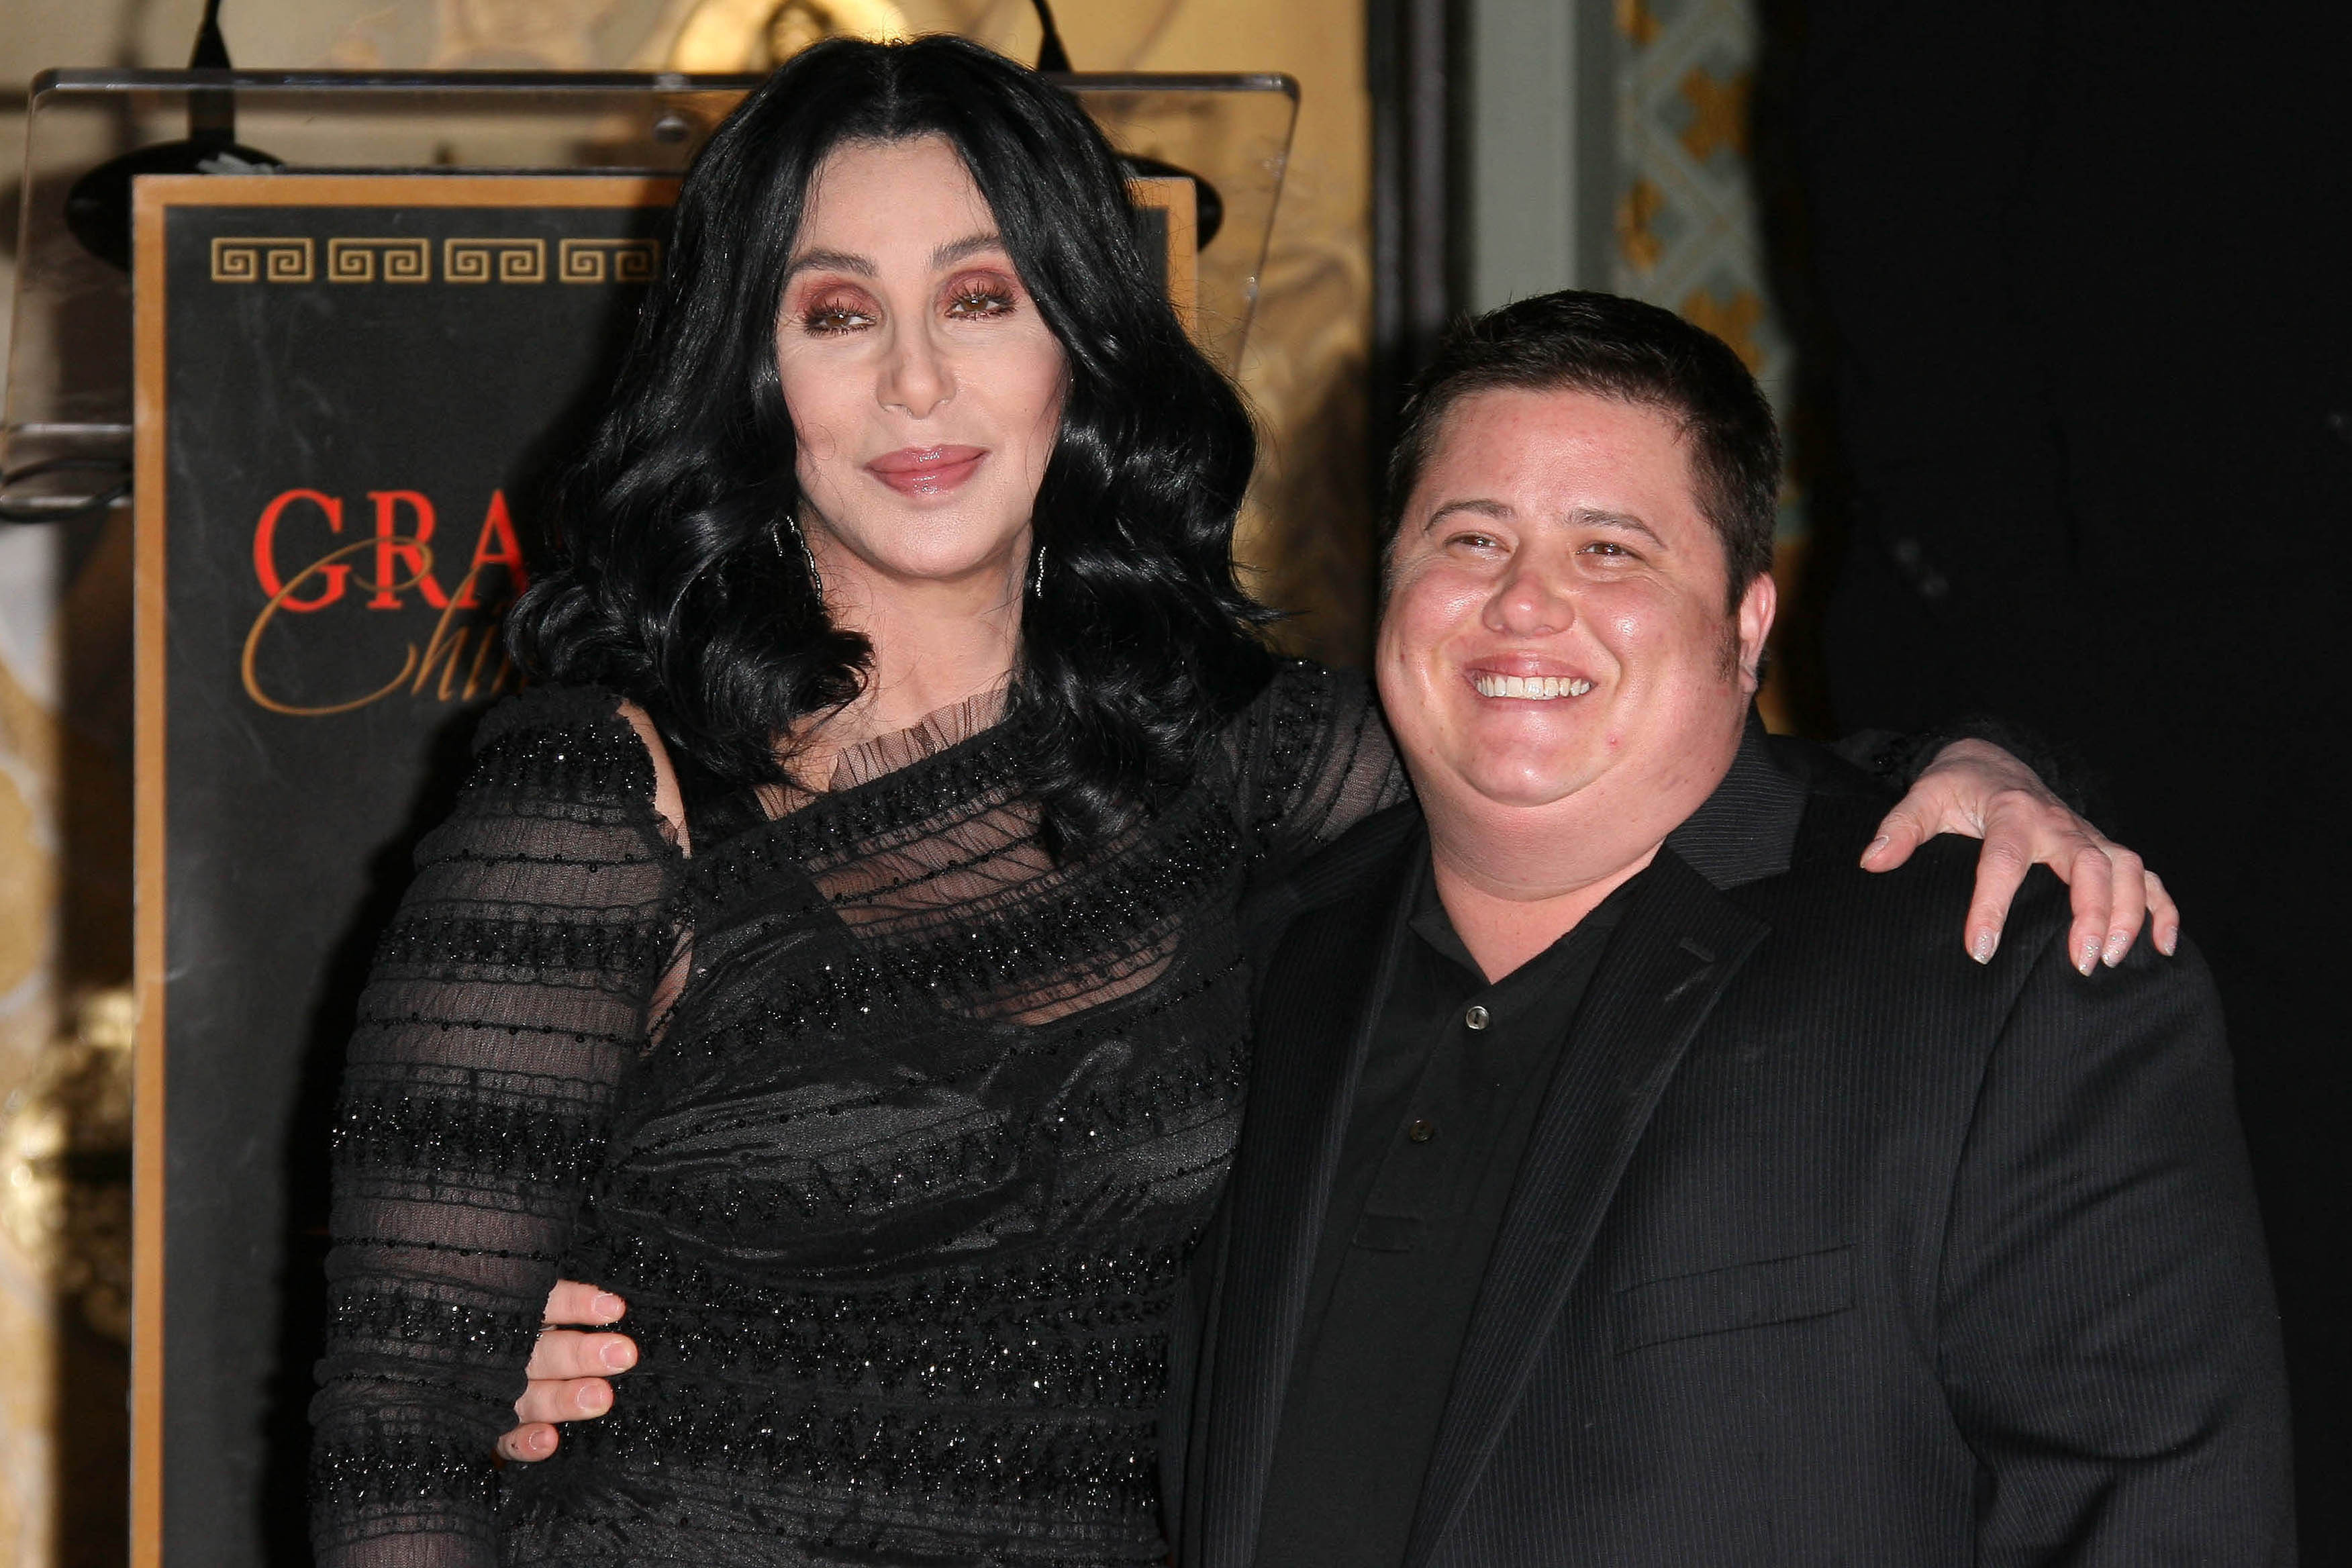 Celebrity Chaz Bono Would Love to See Celebrity Mom Cher Act Again and Focus on Making Horror Movies, Web Fans Shower Love